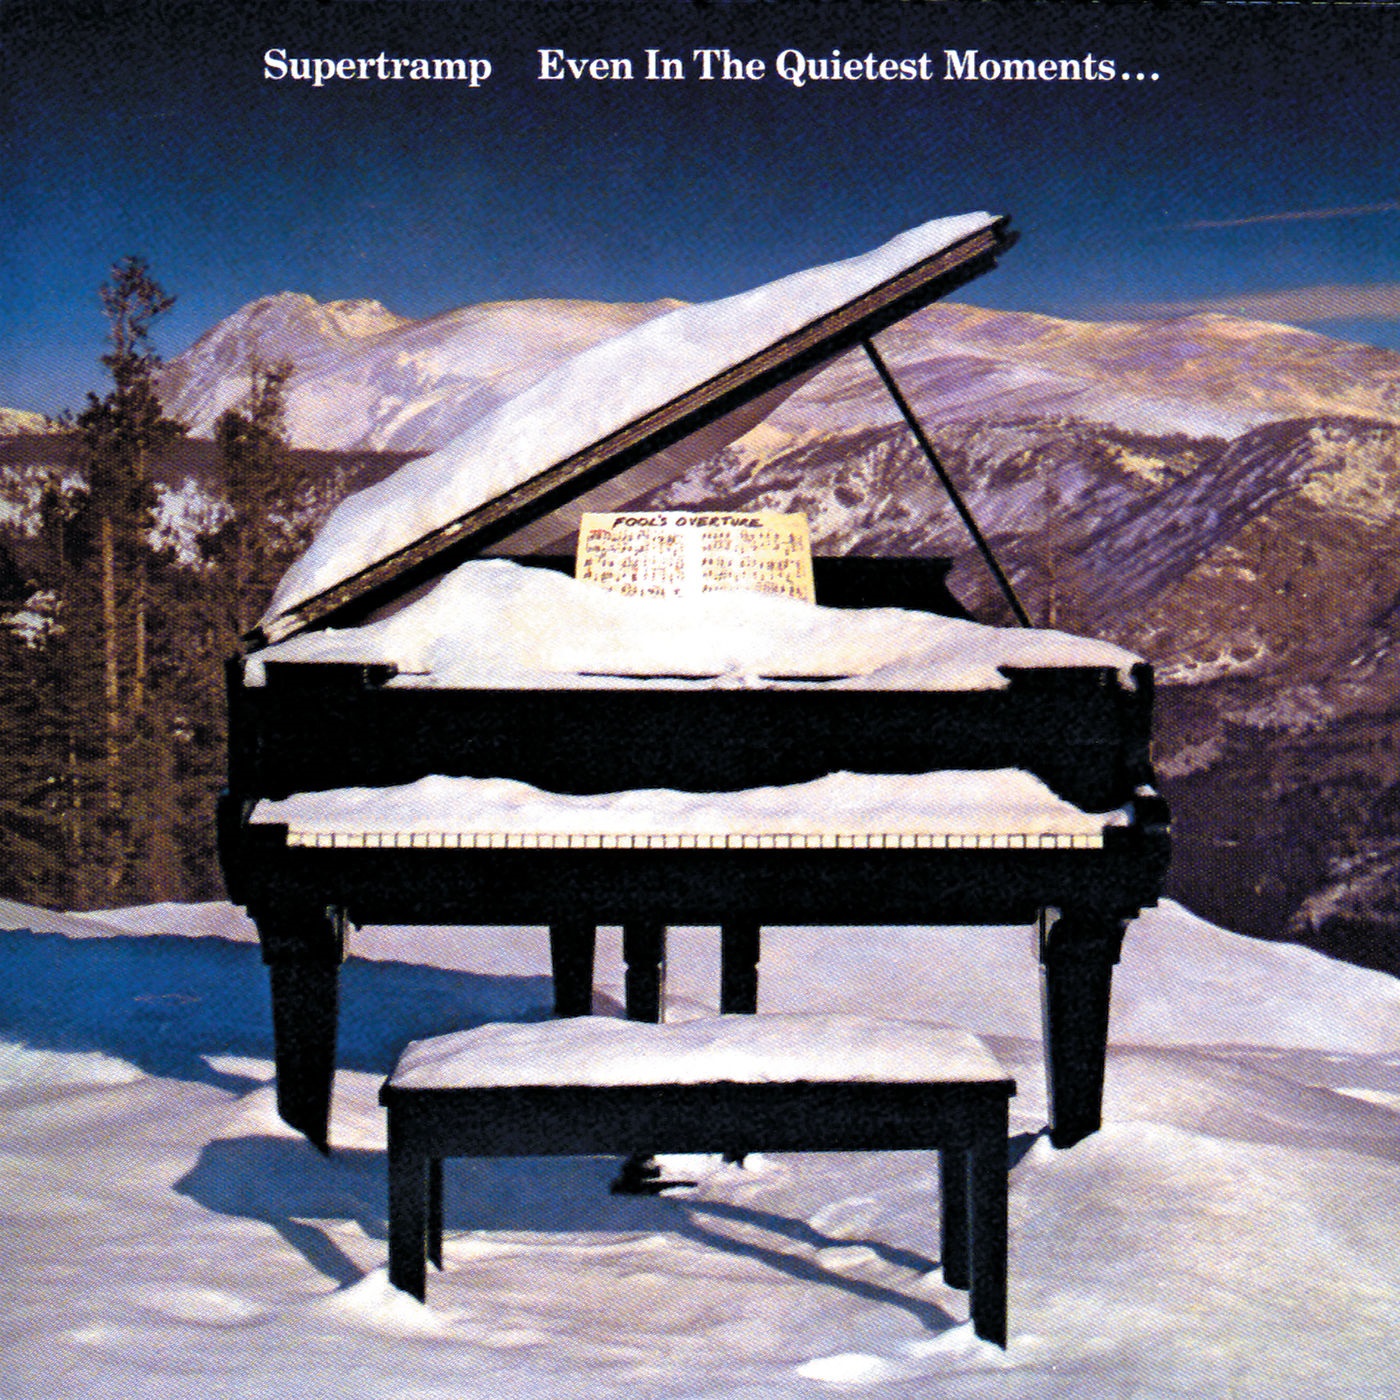 Supertramp - Even in the Quietest Moments… (1977/2020) [FLAC 24bit/96kHz]